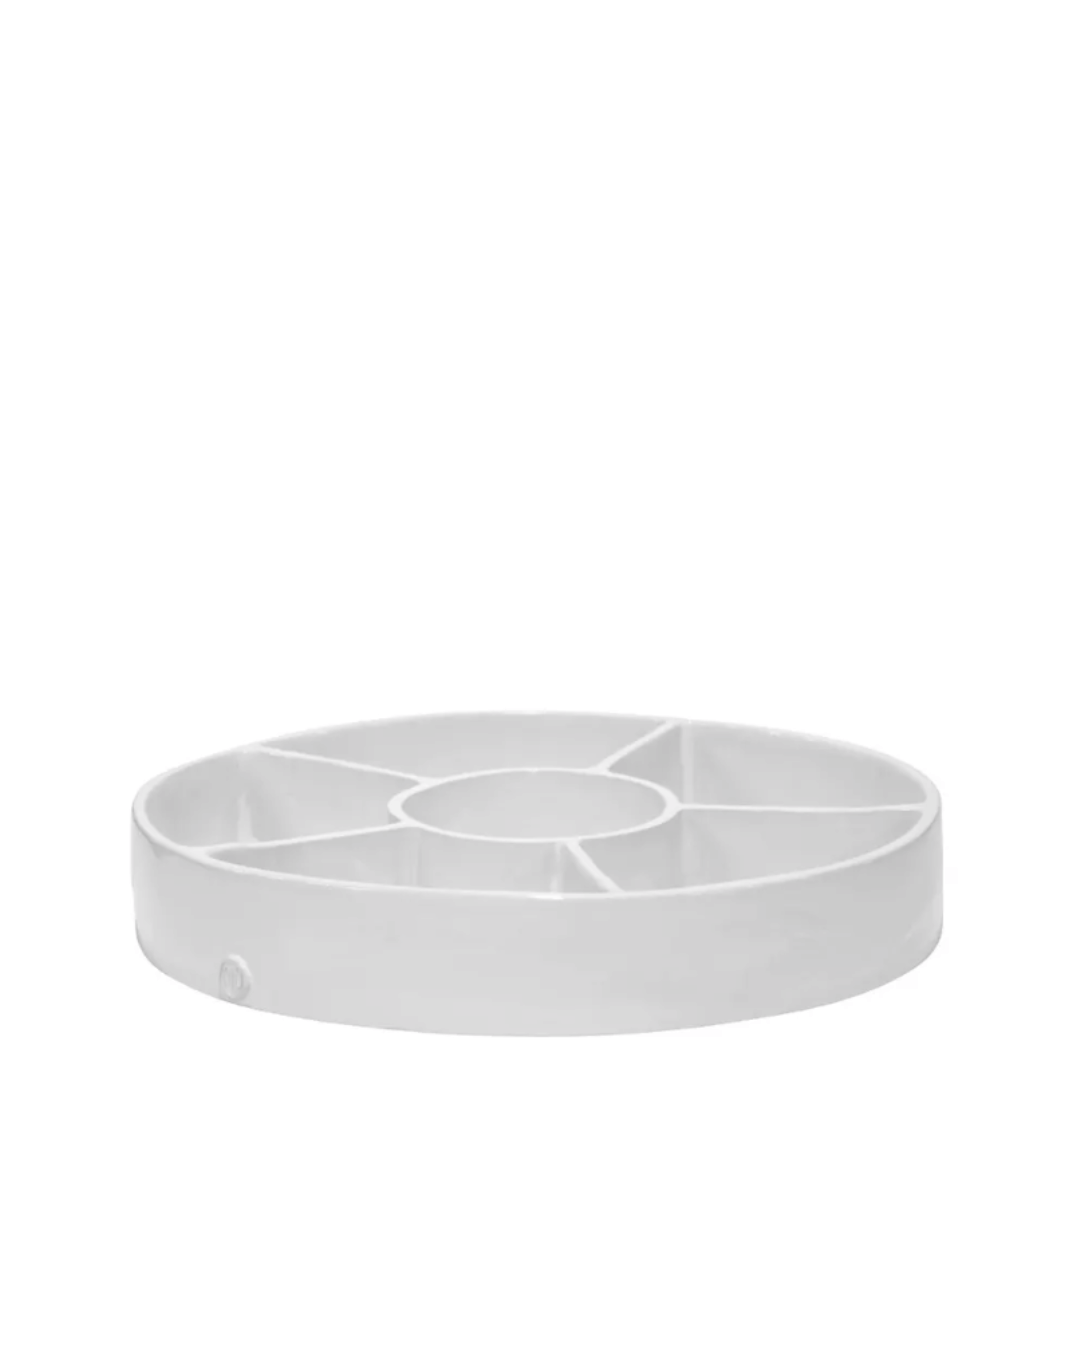 A white, circular plastic organizer tray with multiple compartments, isolated on a light gray background, boasting a Montes Doggett style.